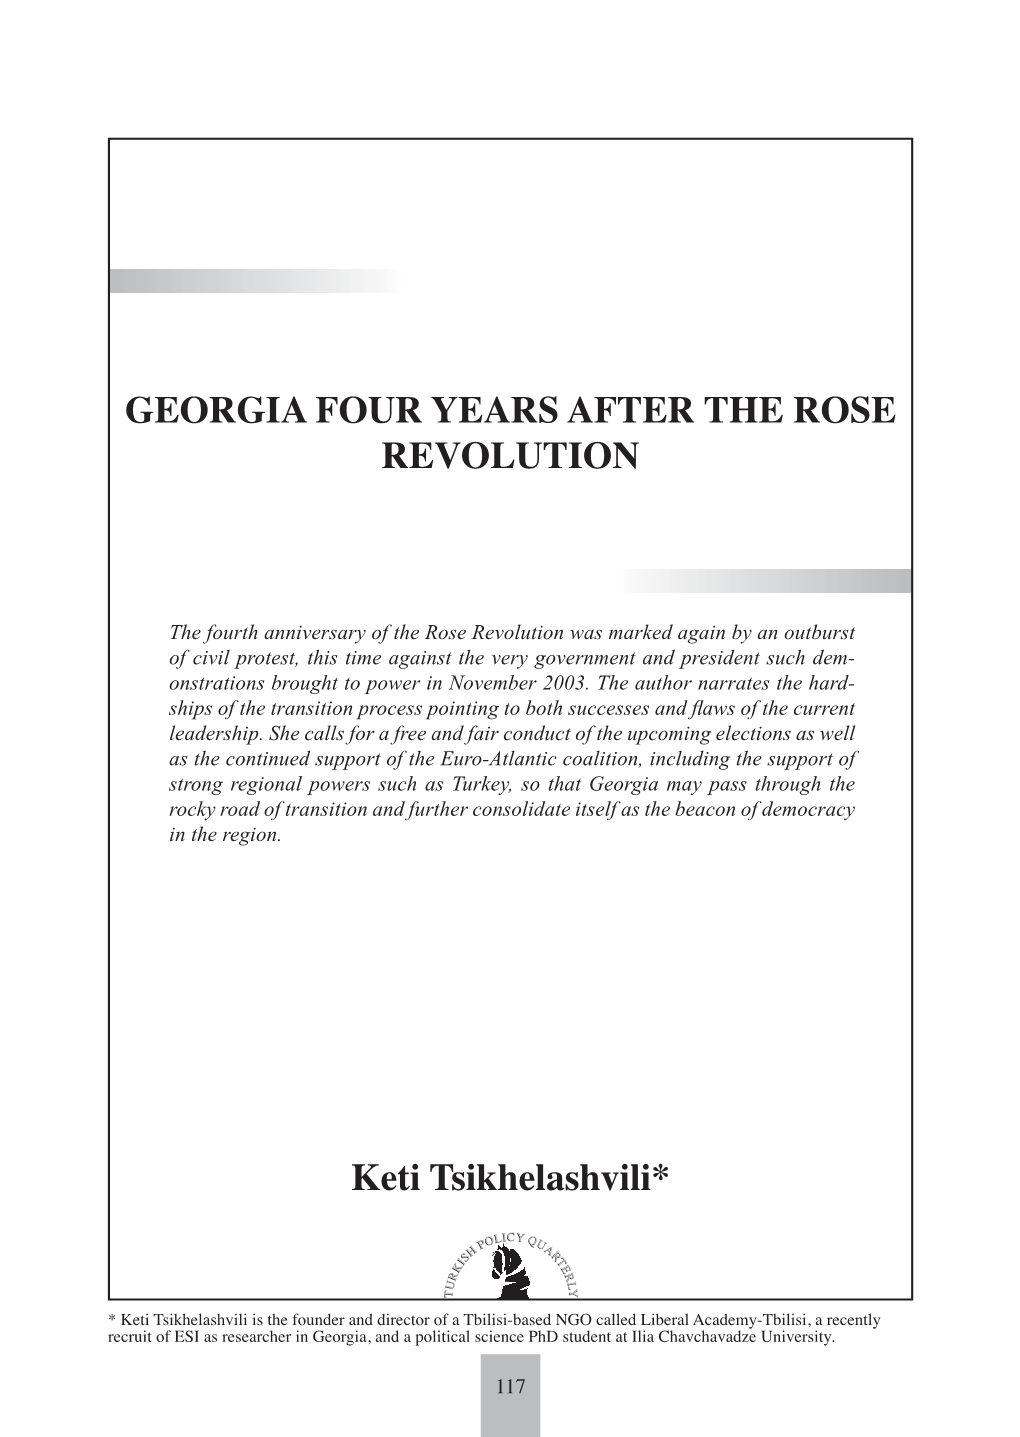 GEORGIA FOUR YEARS AFTER the ROSE REVOLUTION Keti